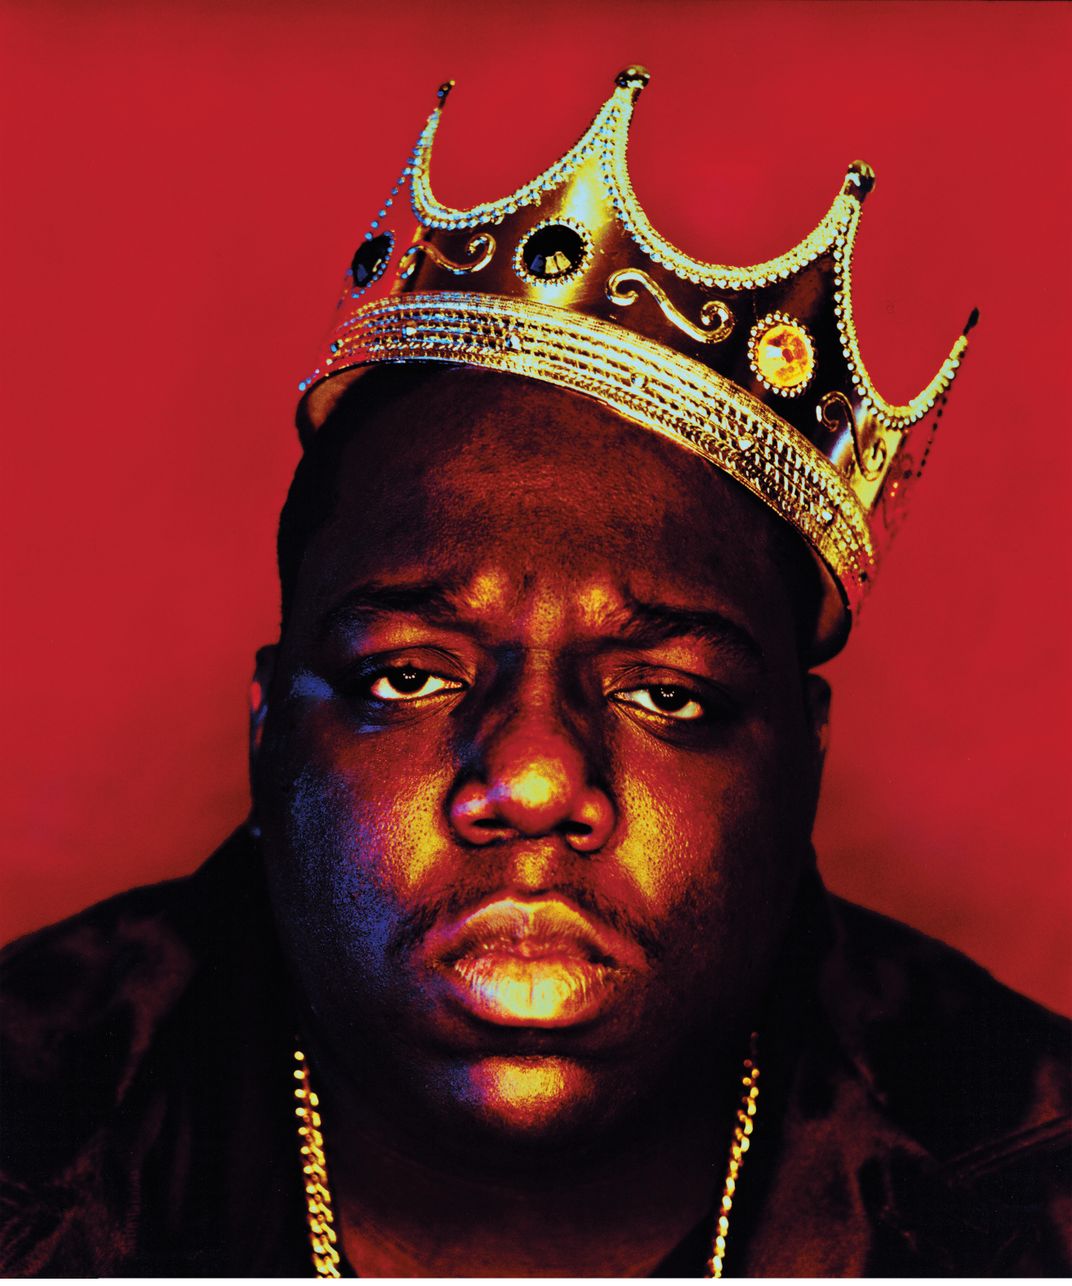 a Black man sits for a portrait wearing a gold crown in front of a red back drop